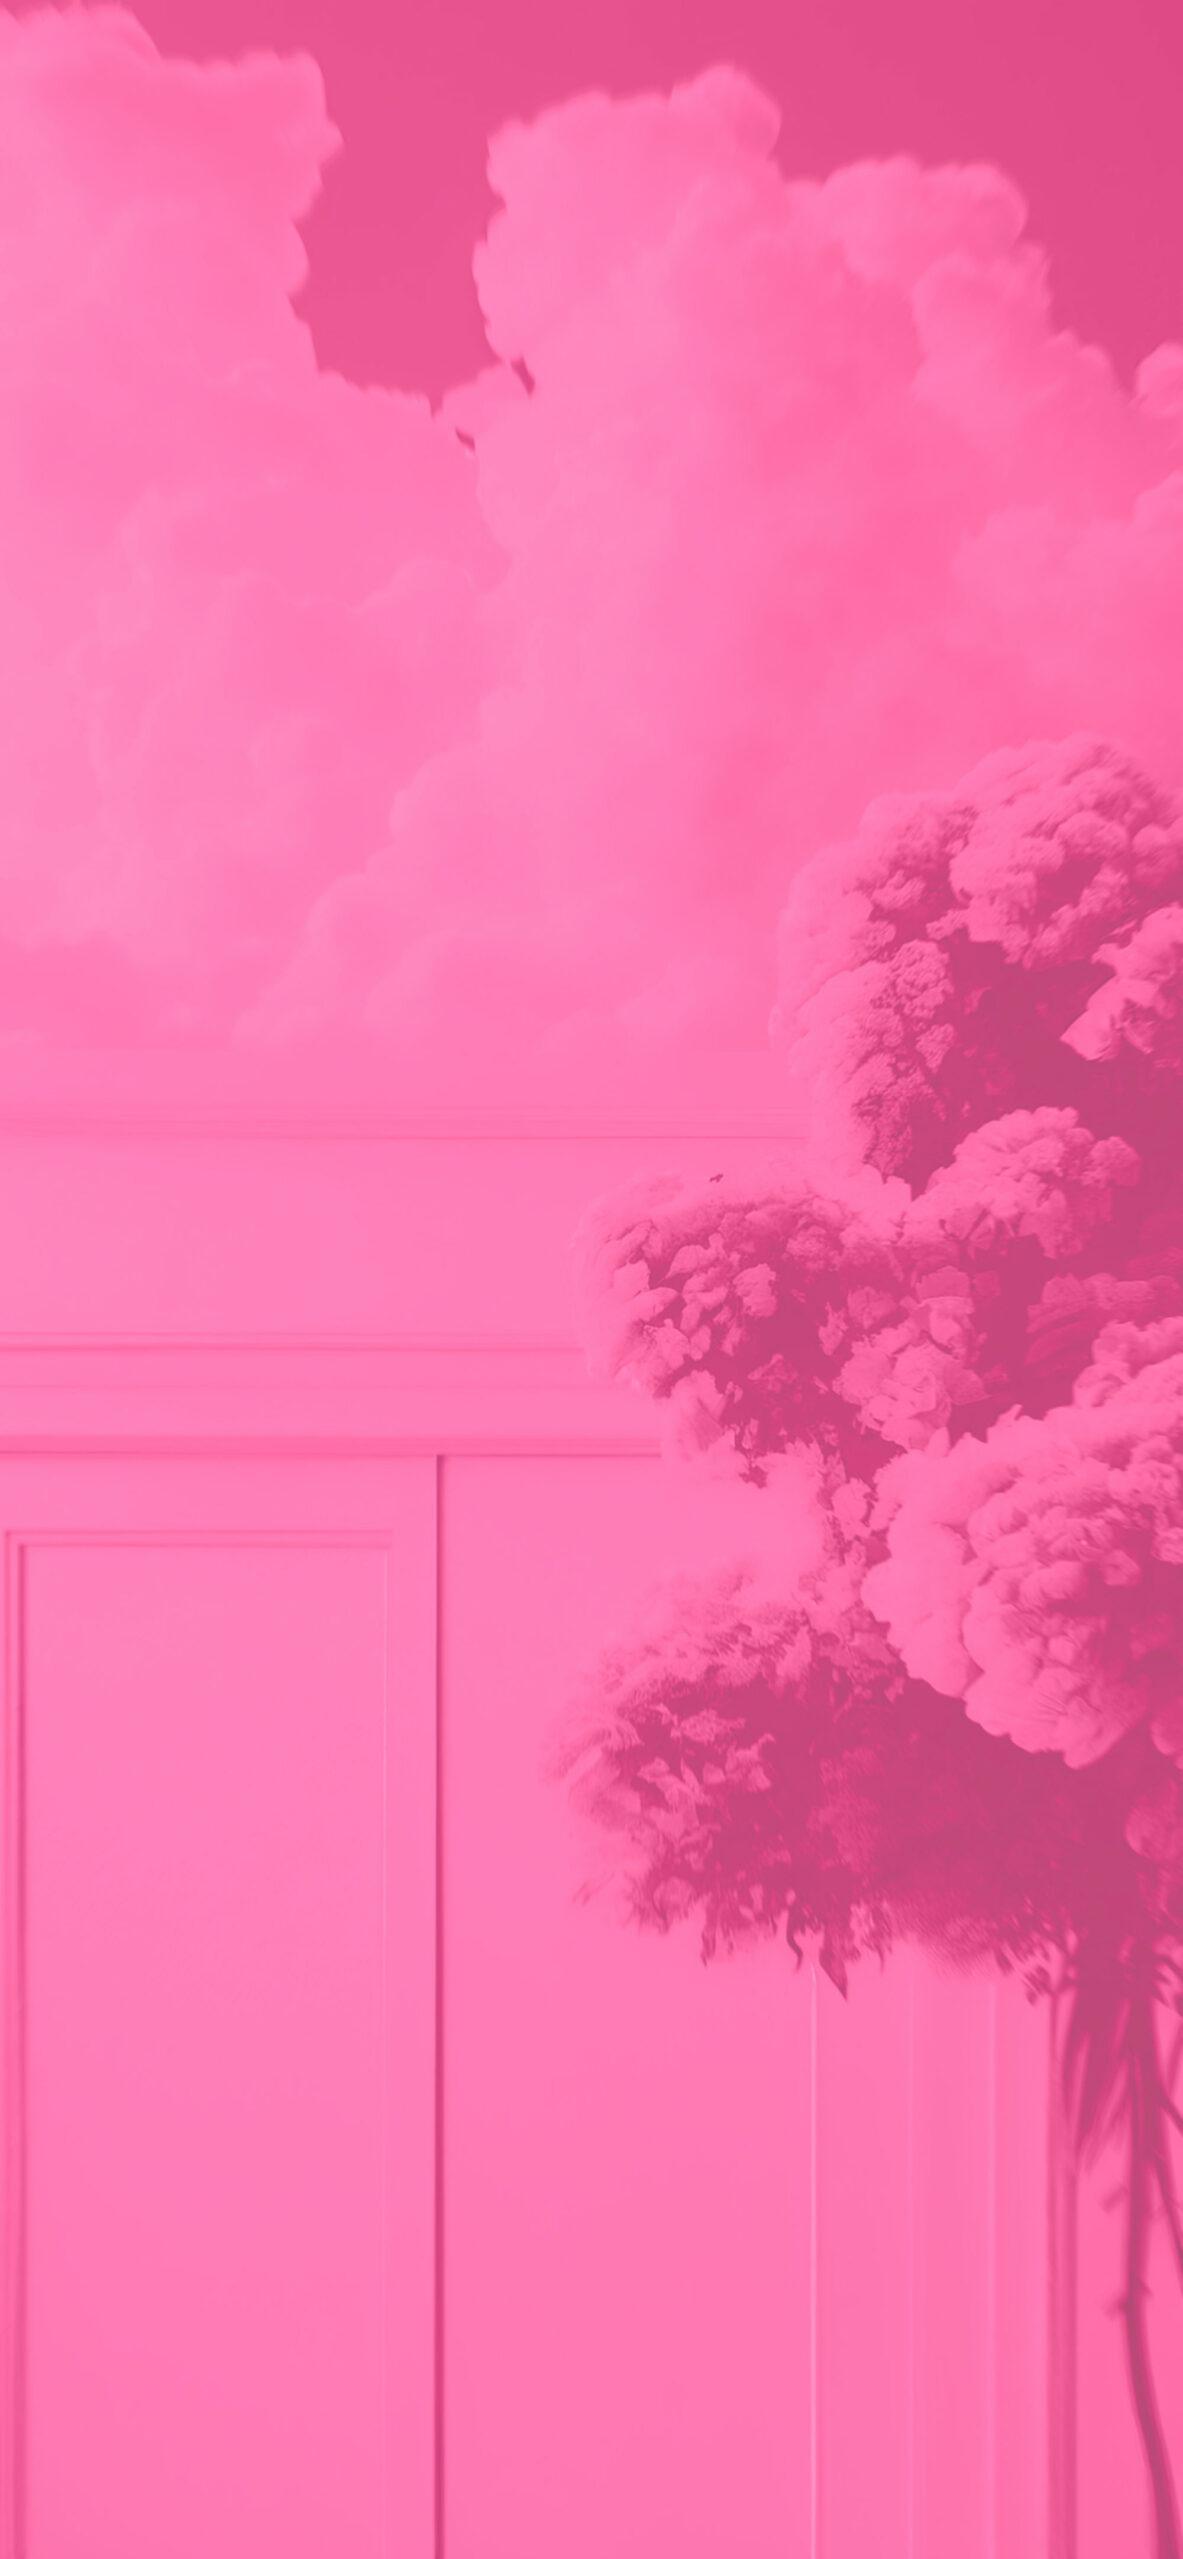 Clouds Wall And Tree Aesthetic Pink Wallpaper